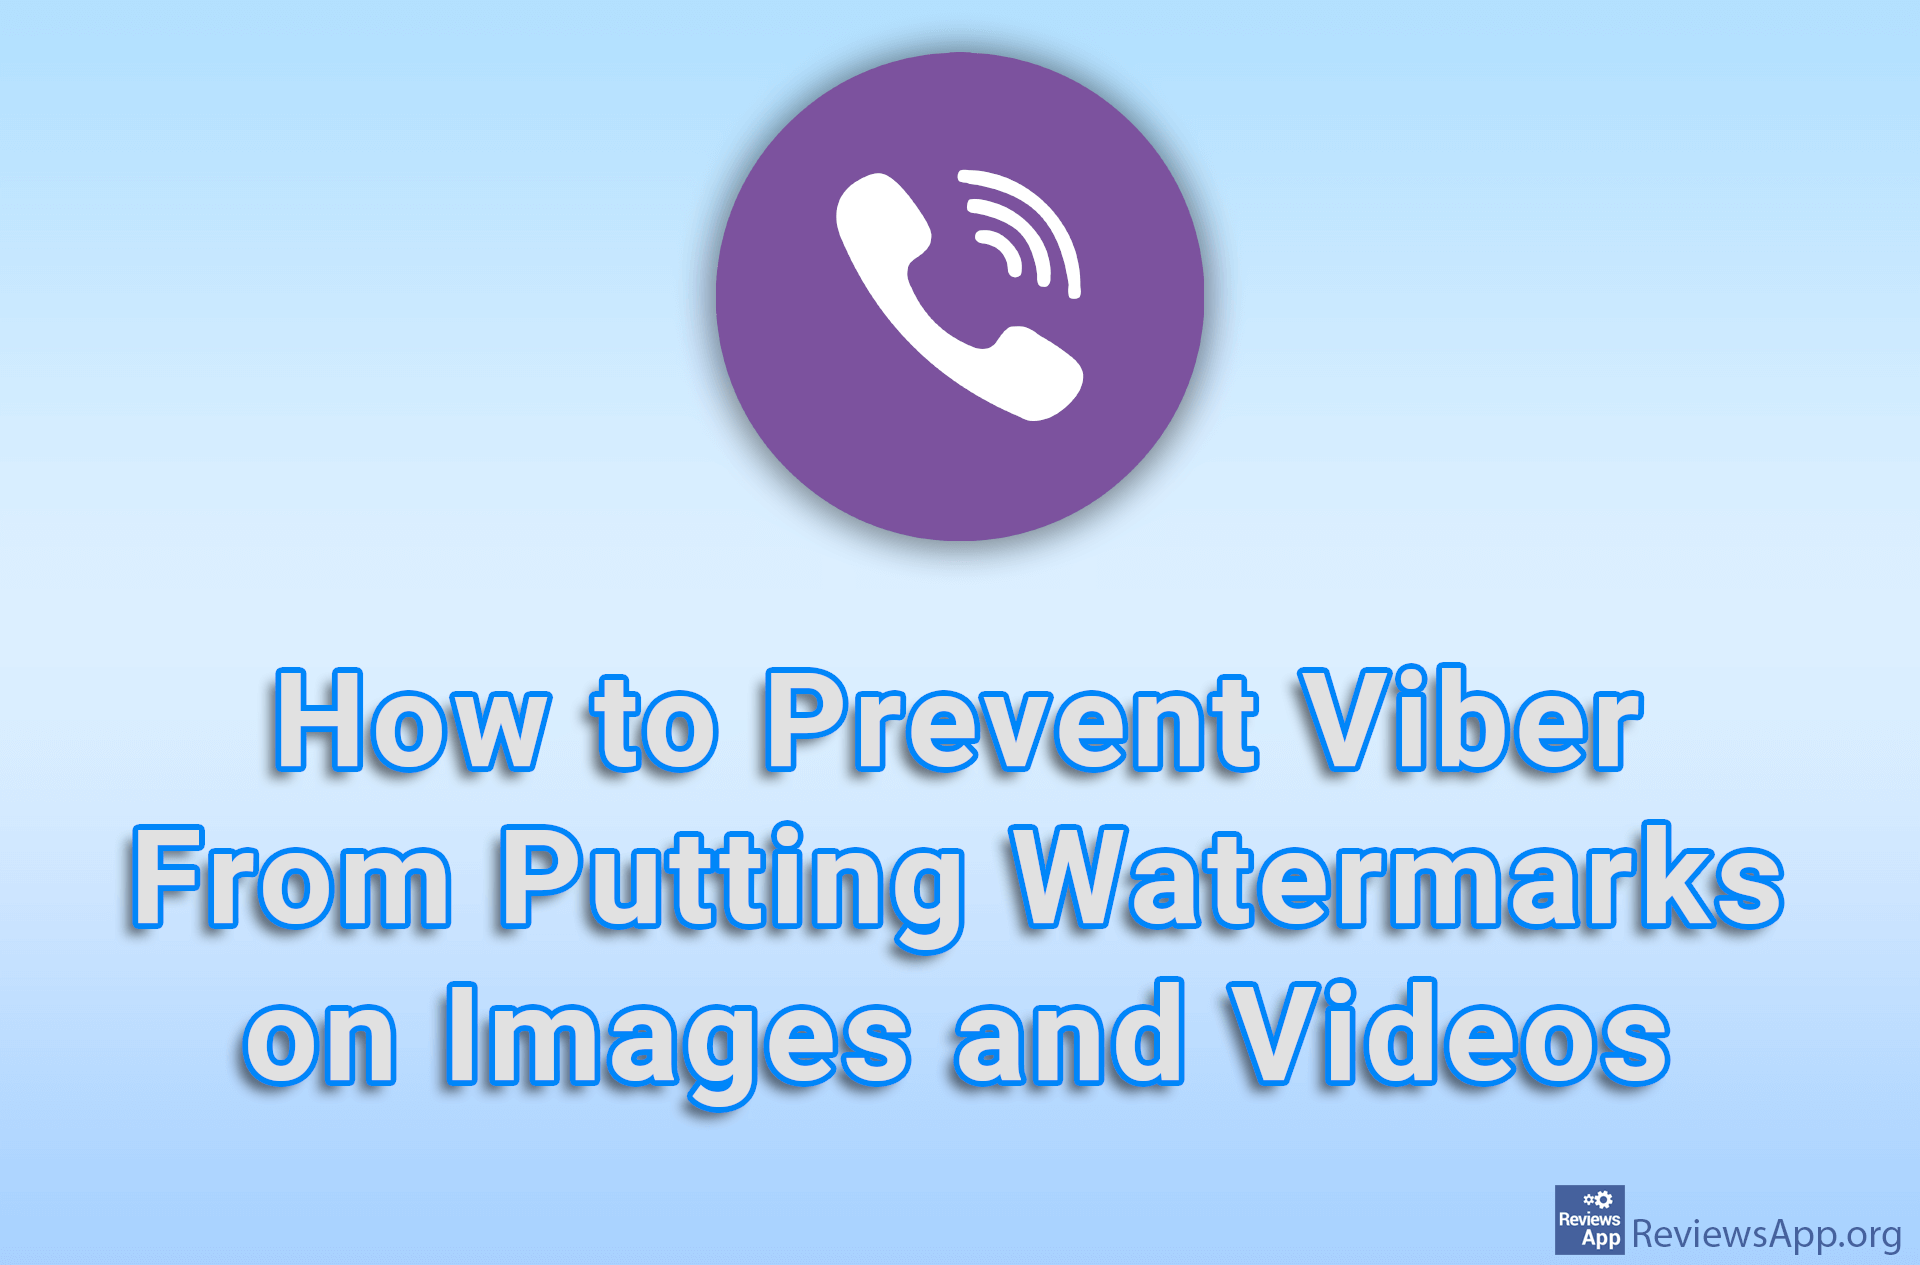 How to Prevent Viber From Putting Watermarks on Images and Videos